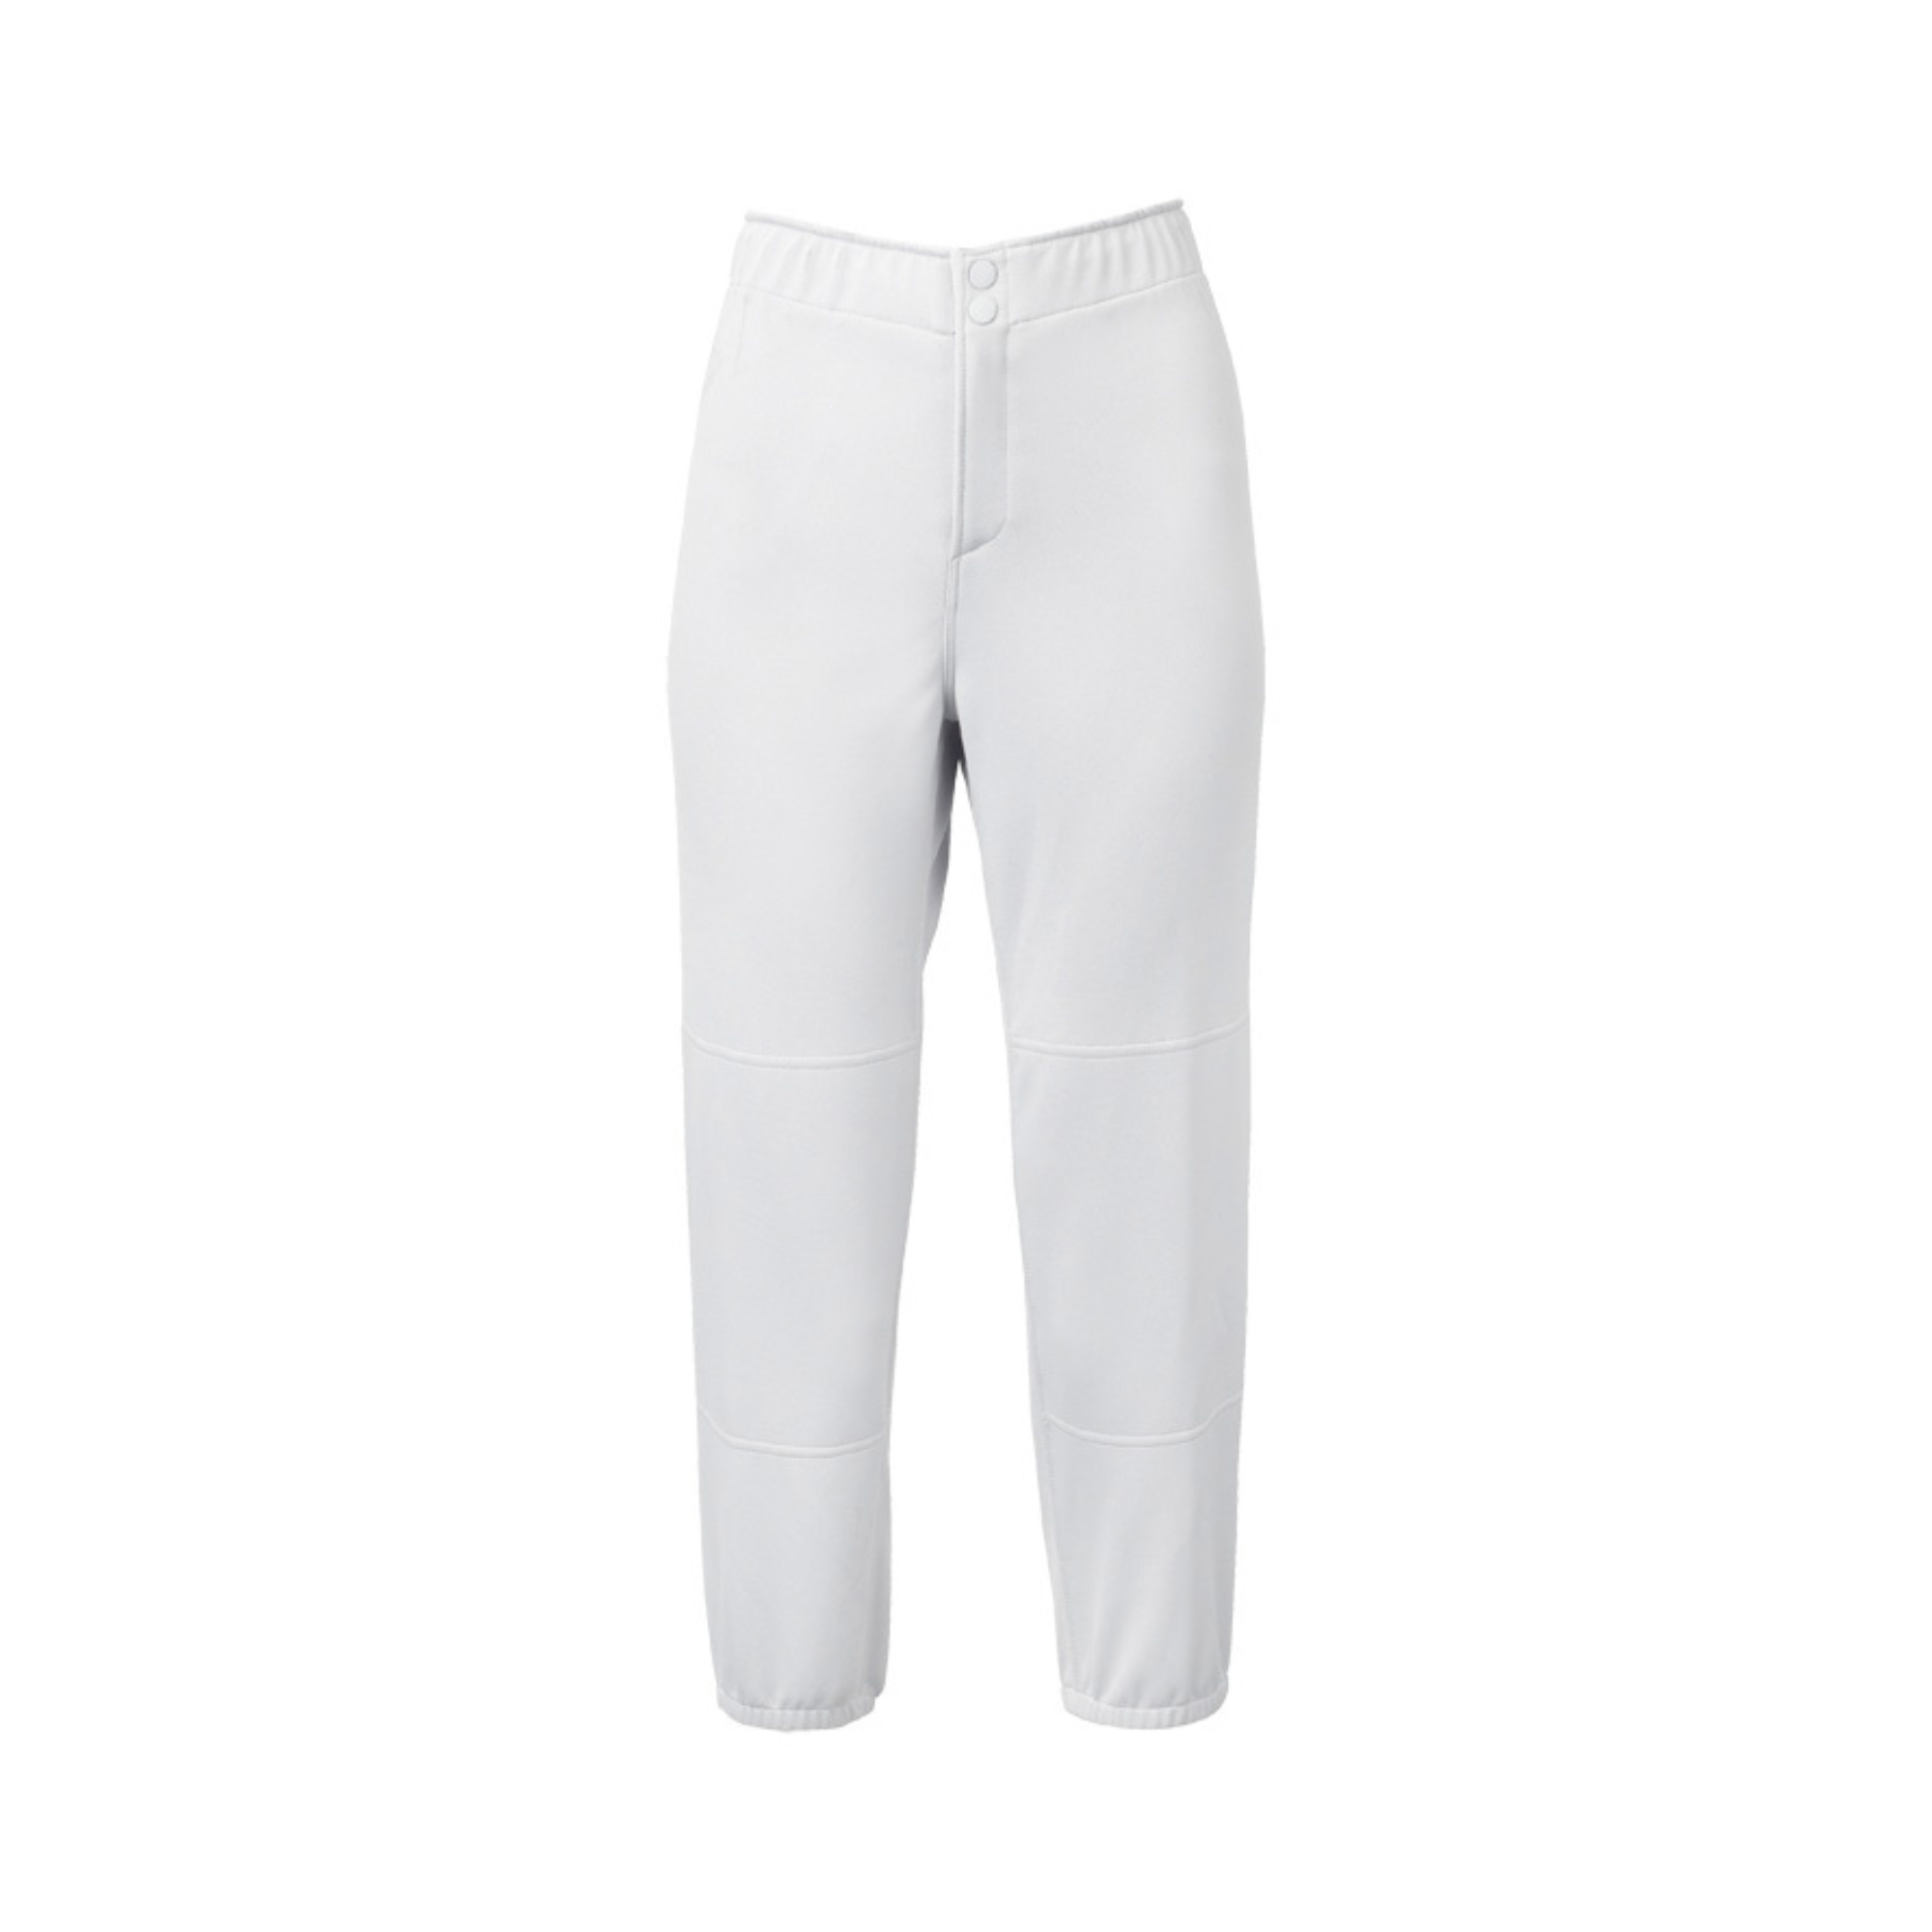 Mizuno Women's Non-Belted Low Rise Fastpitch Pants White